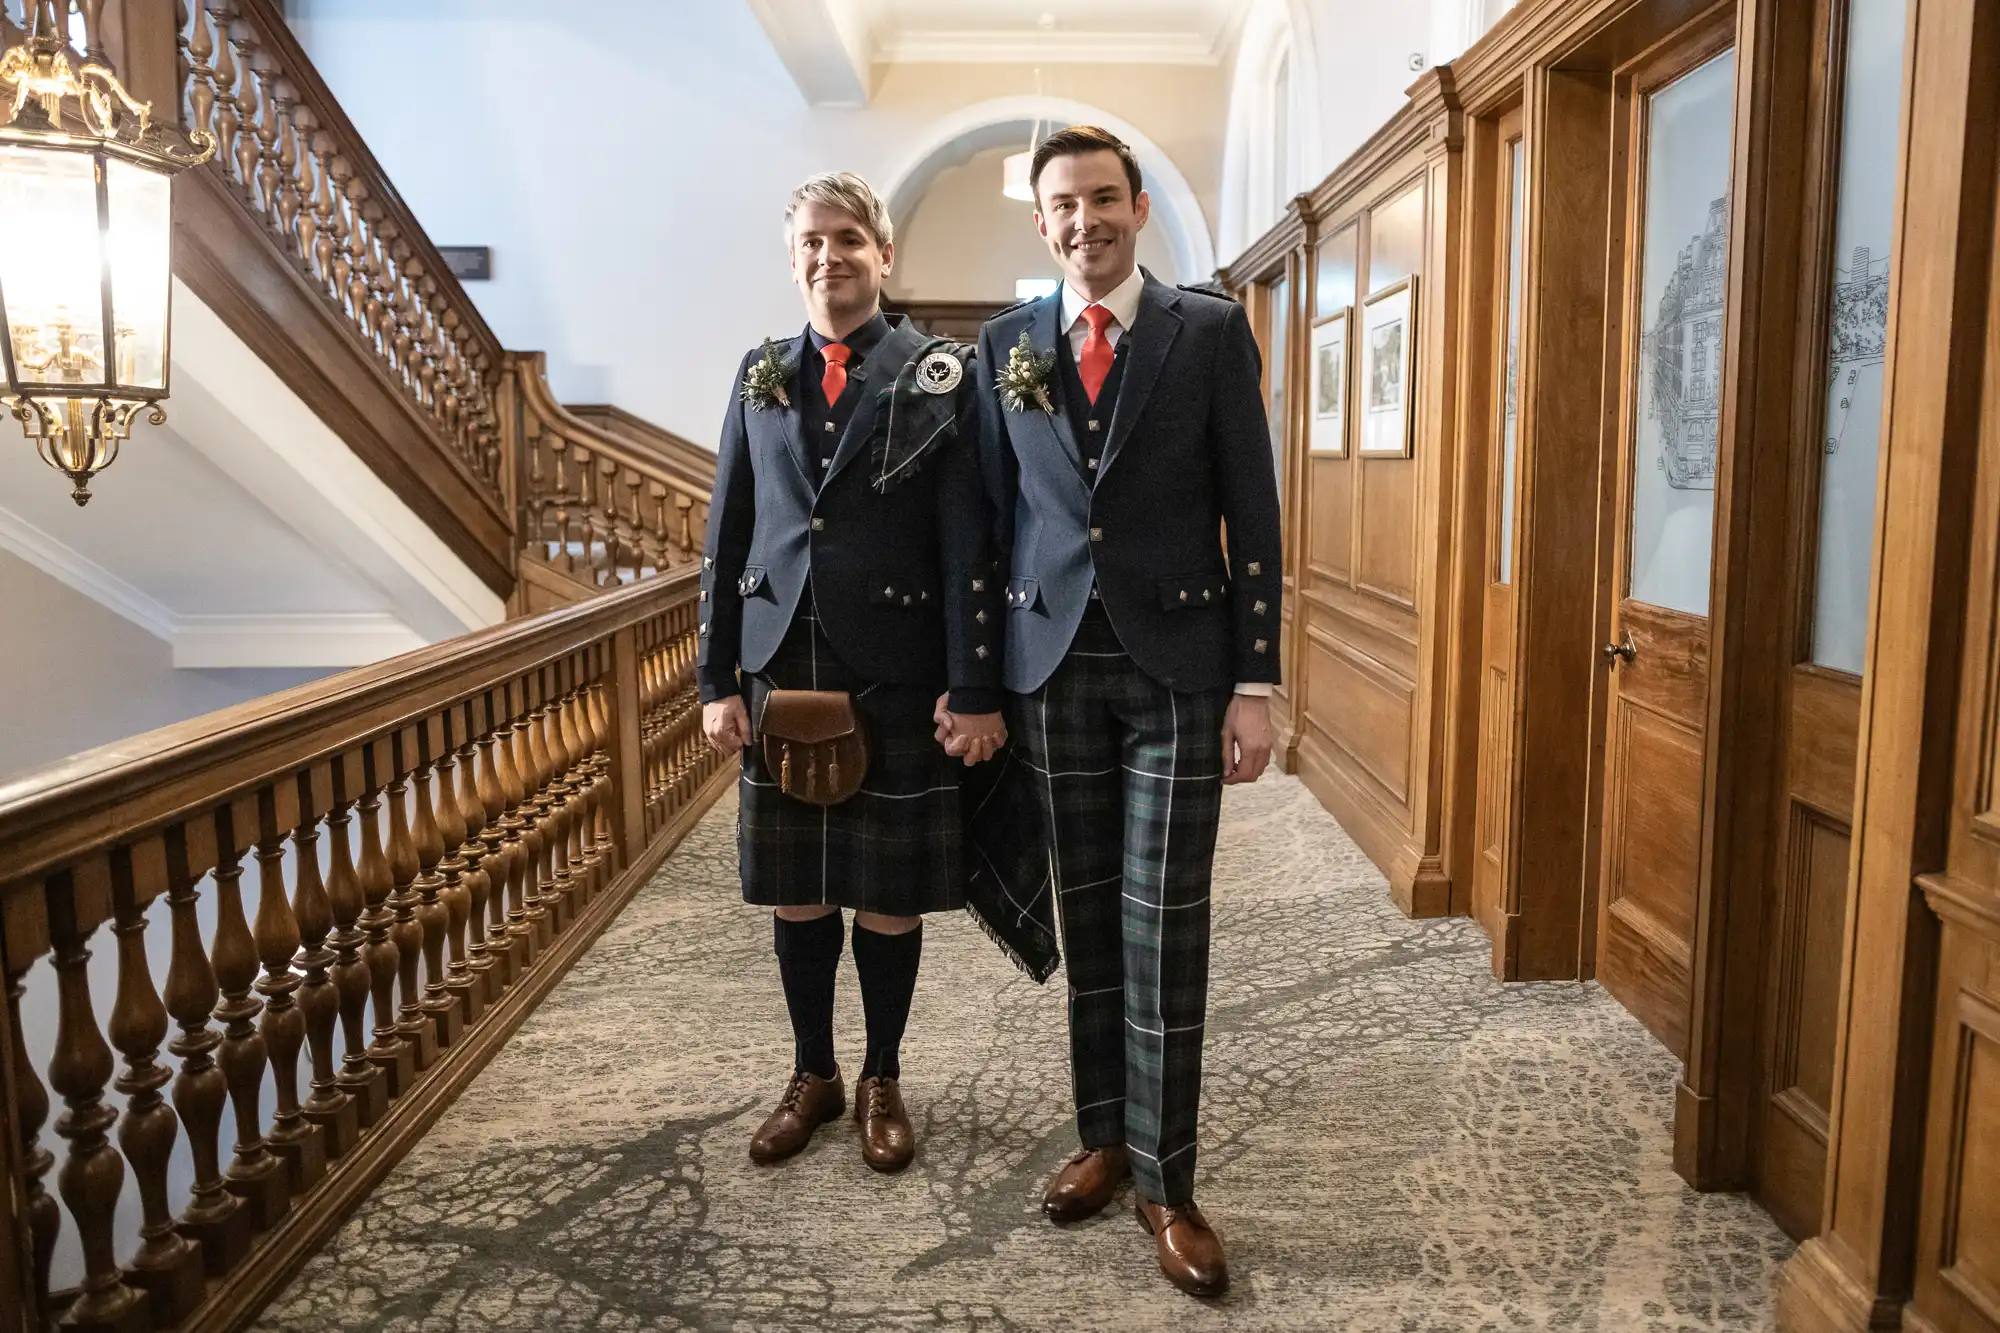 Two men stand in a hallway wearing traditional Scottish kilts and jackets, smiling at the camera.